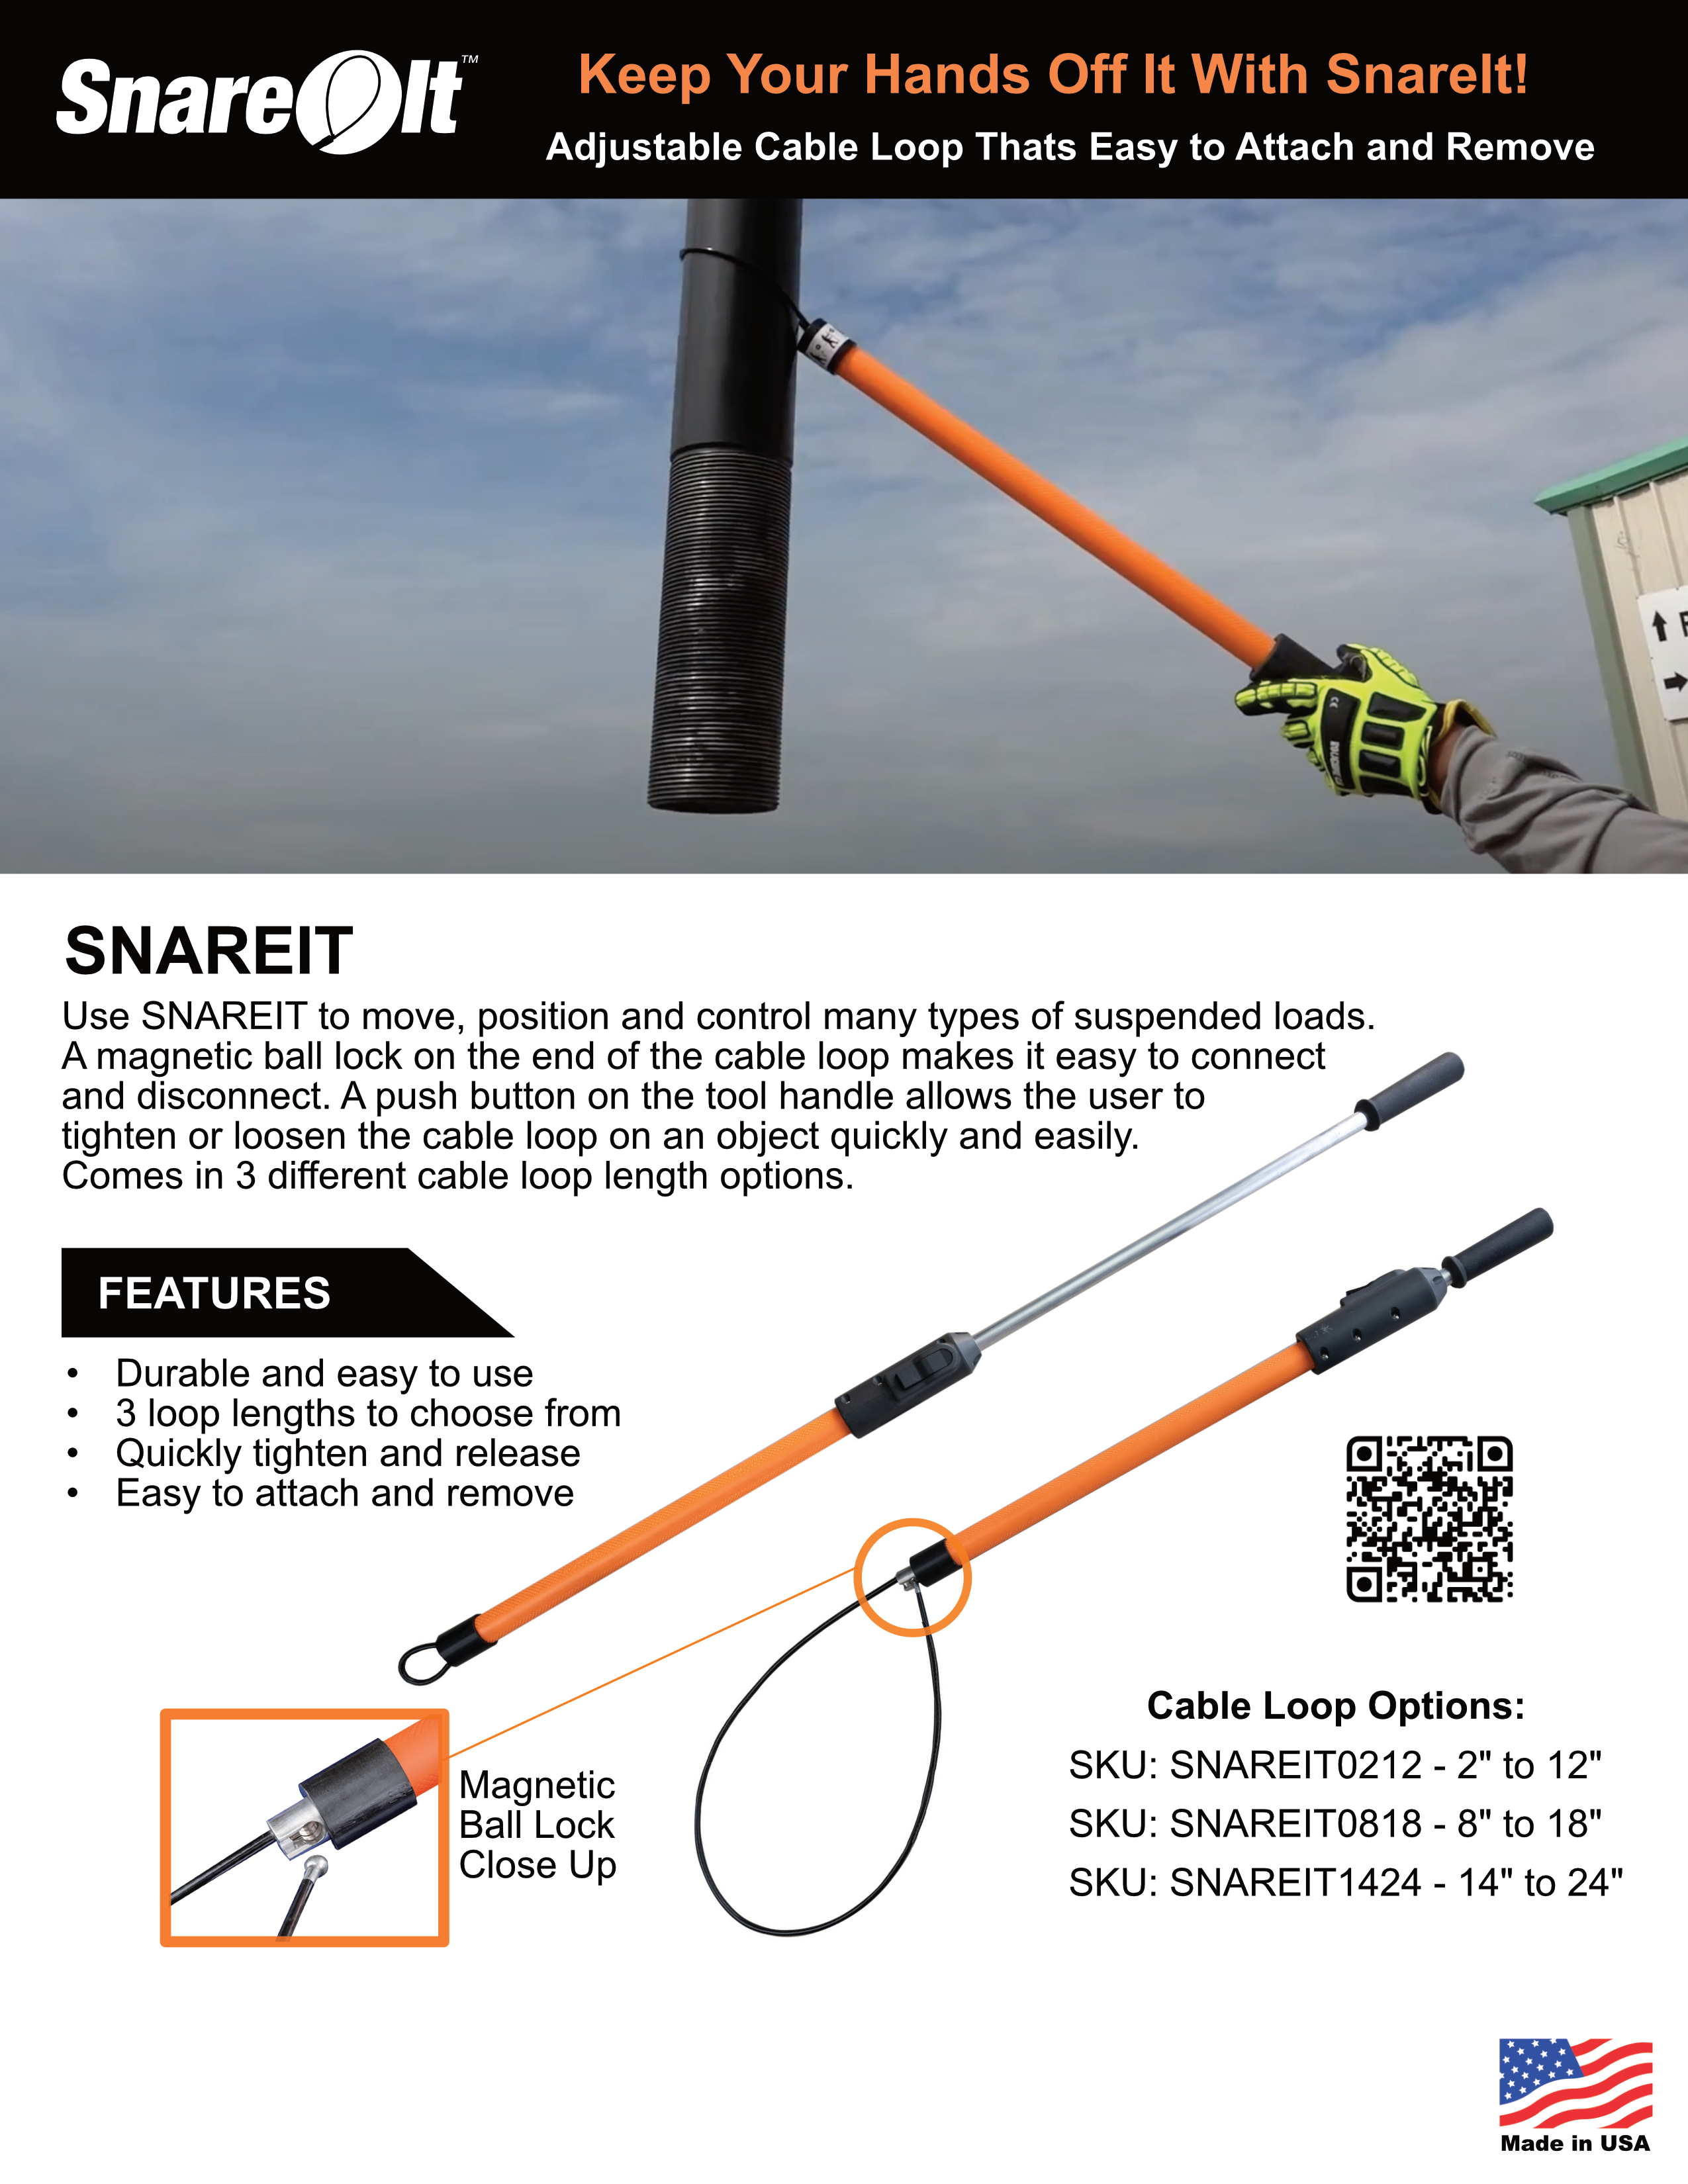 Snare-It - Adjustable Cable Loop Hand Safety Tool